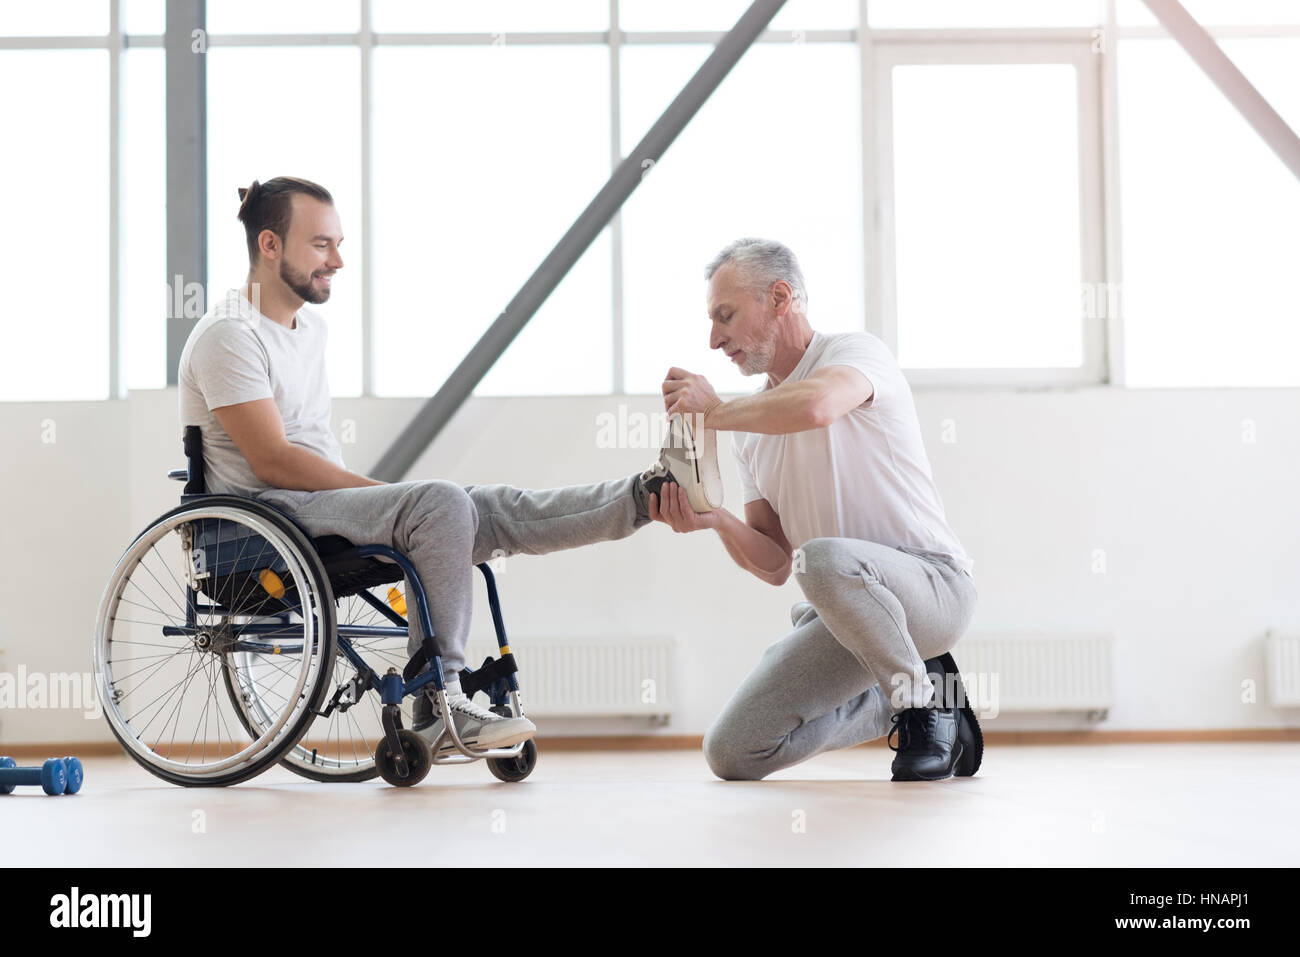 Aged orthopedist working with disabled patient in the gym Stock Photo